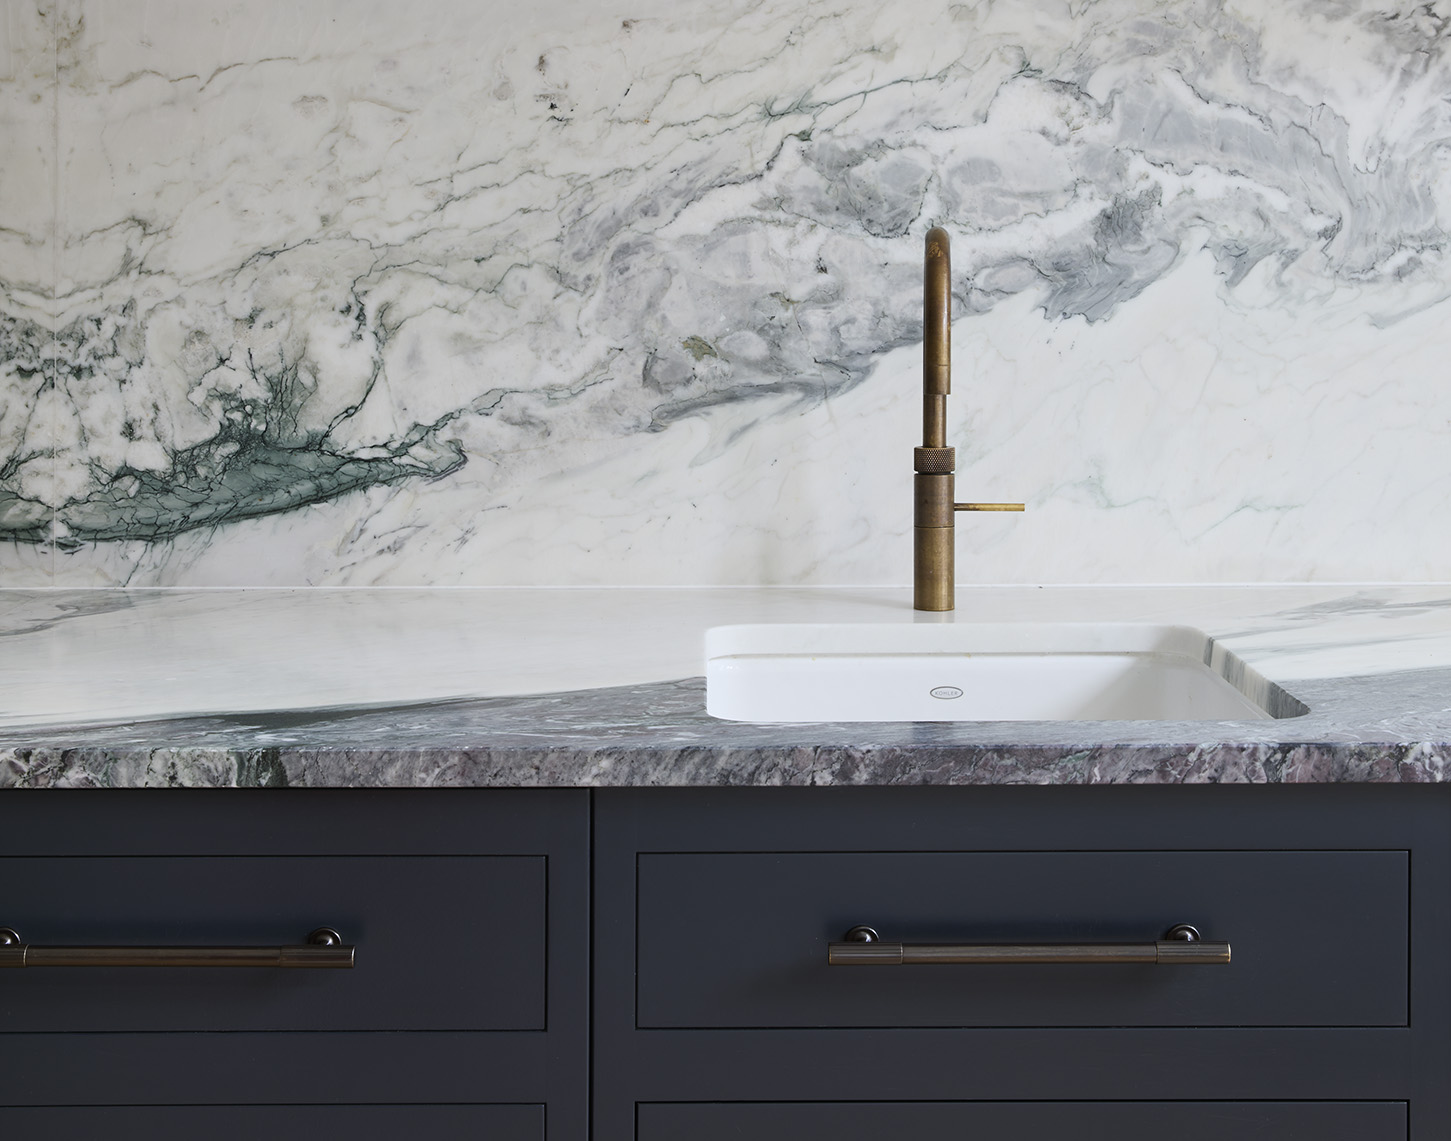 A detail shot of a hot water tap with marble backsplash and dark grey cabinets below.